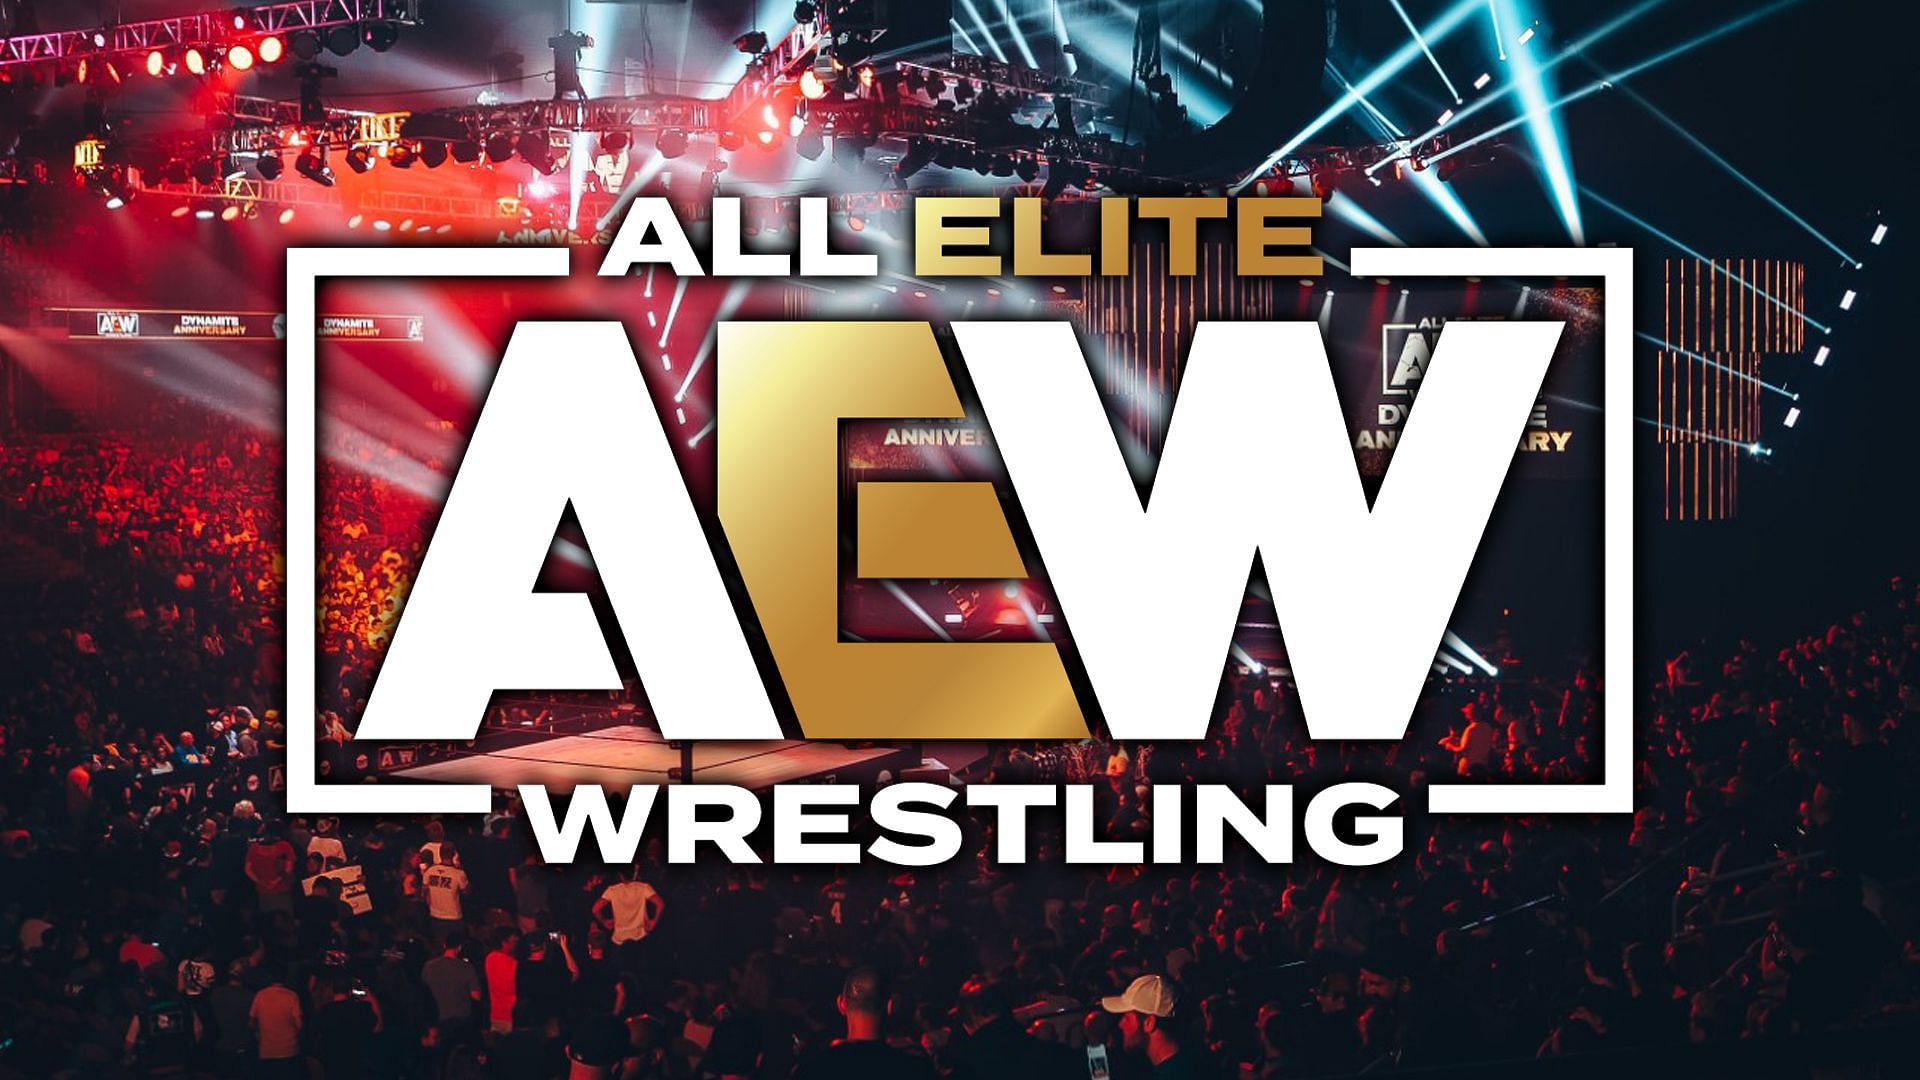 AEW has been going through some personnel changes